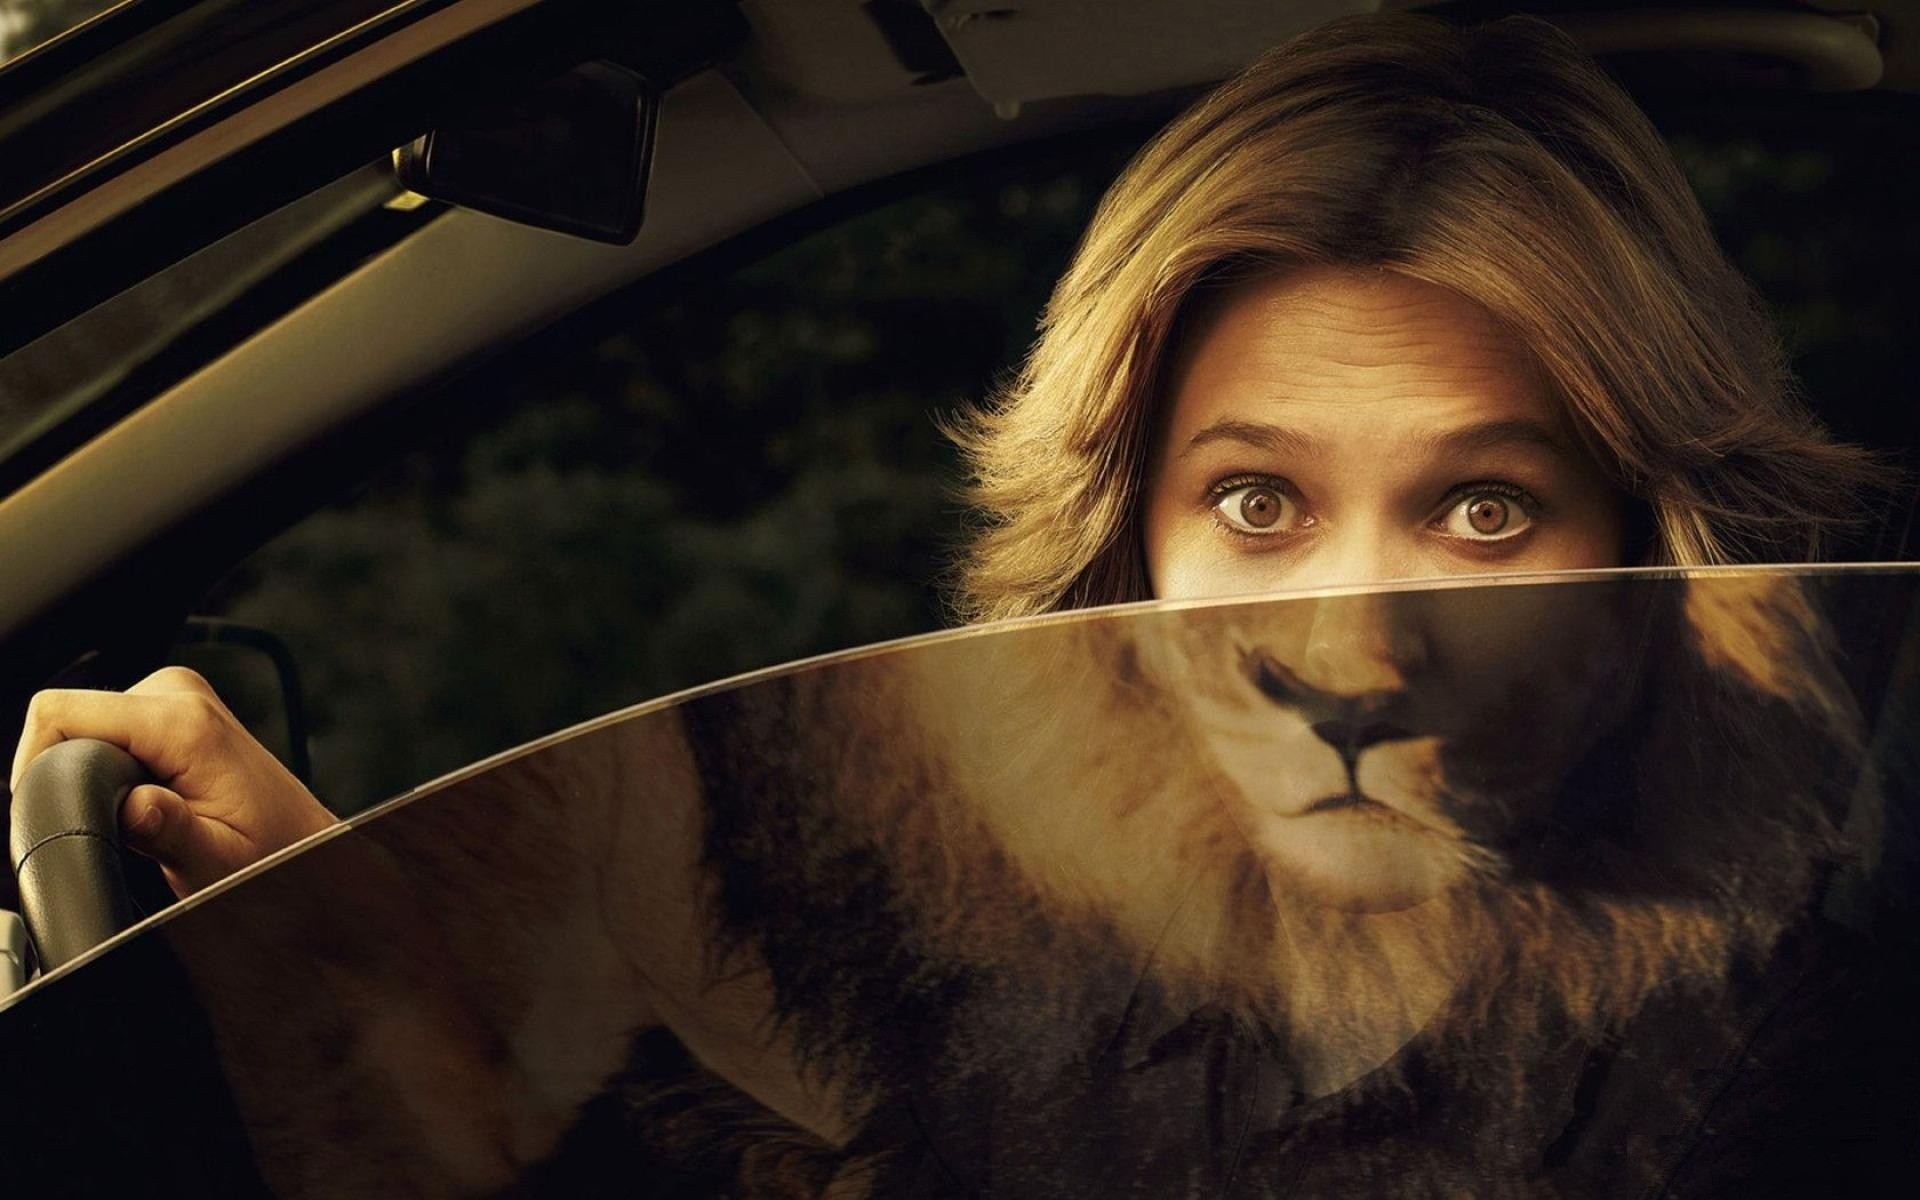 women, Mirrors, Funny, Lions, Reflections Wallpaper